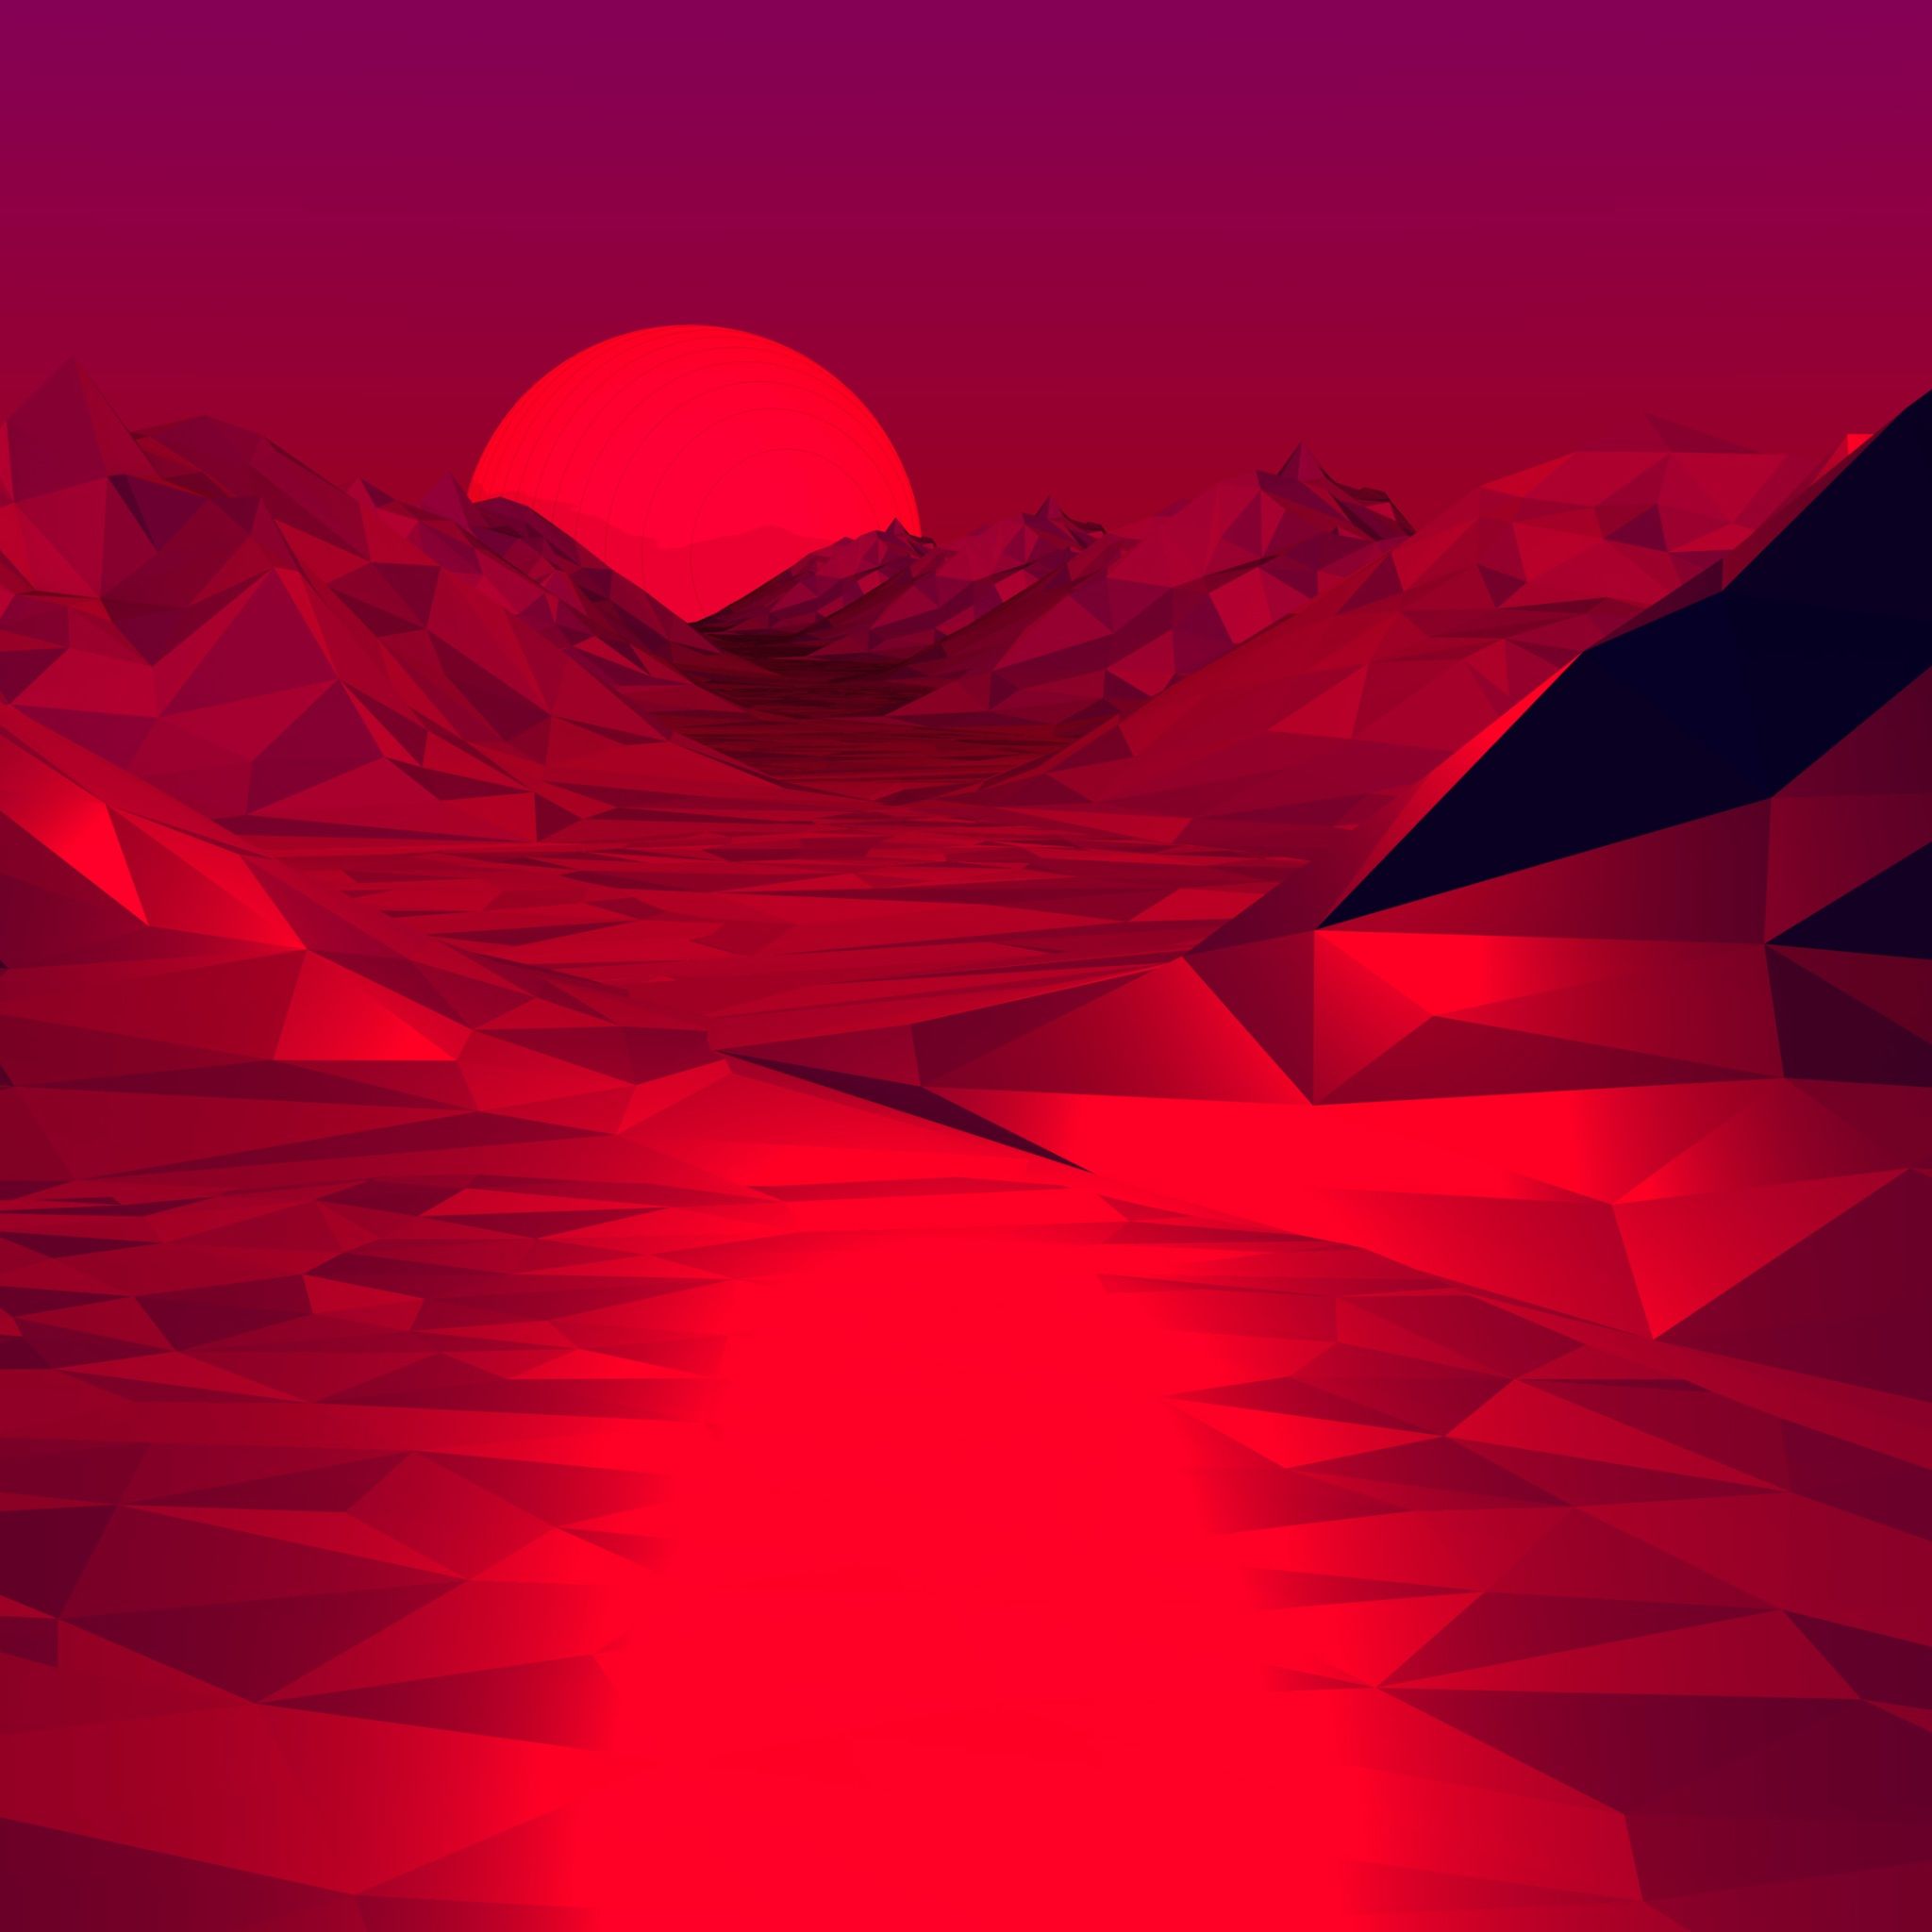 A low poly landscape with mountains and water - Low poly